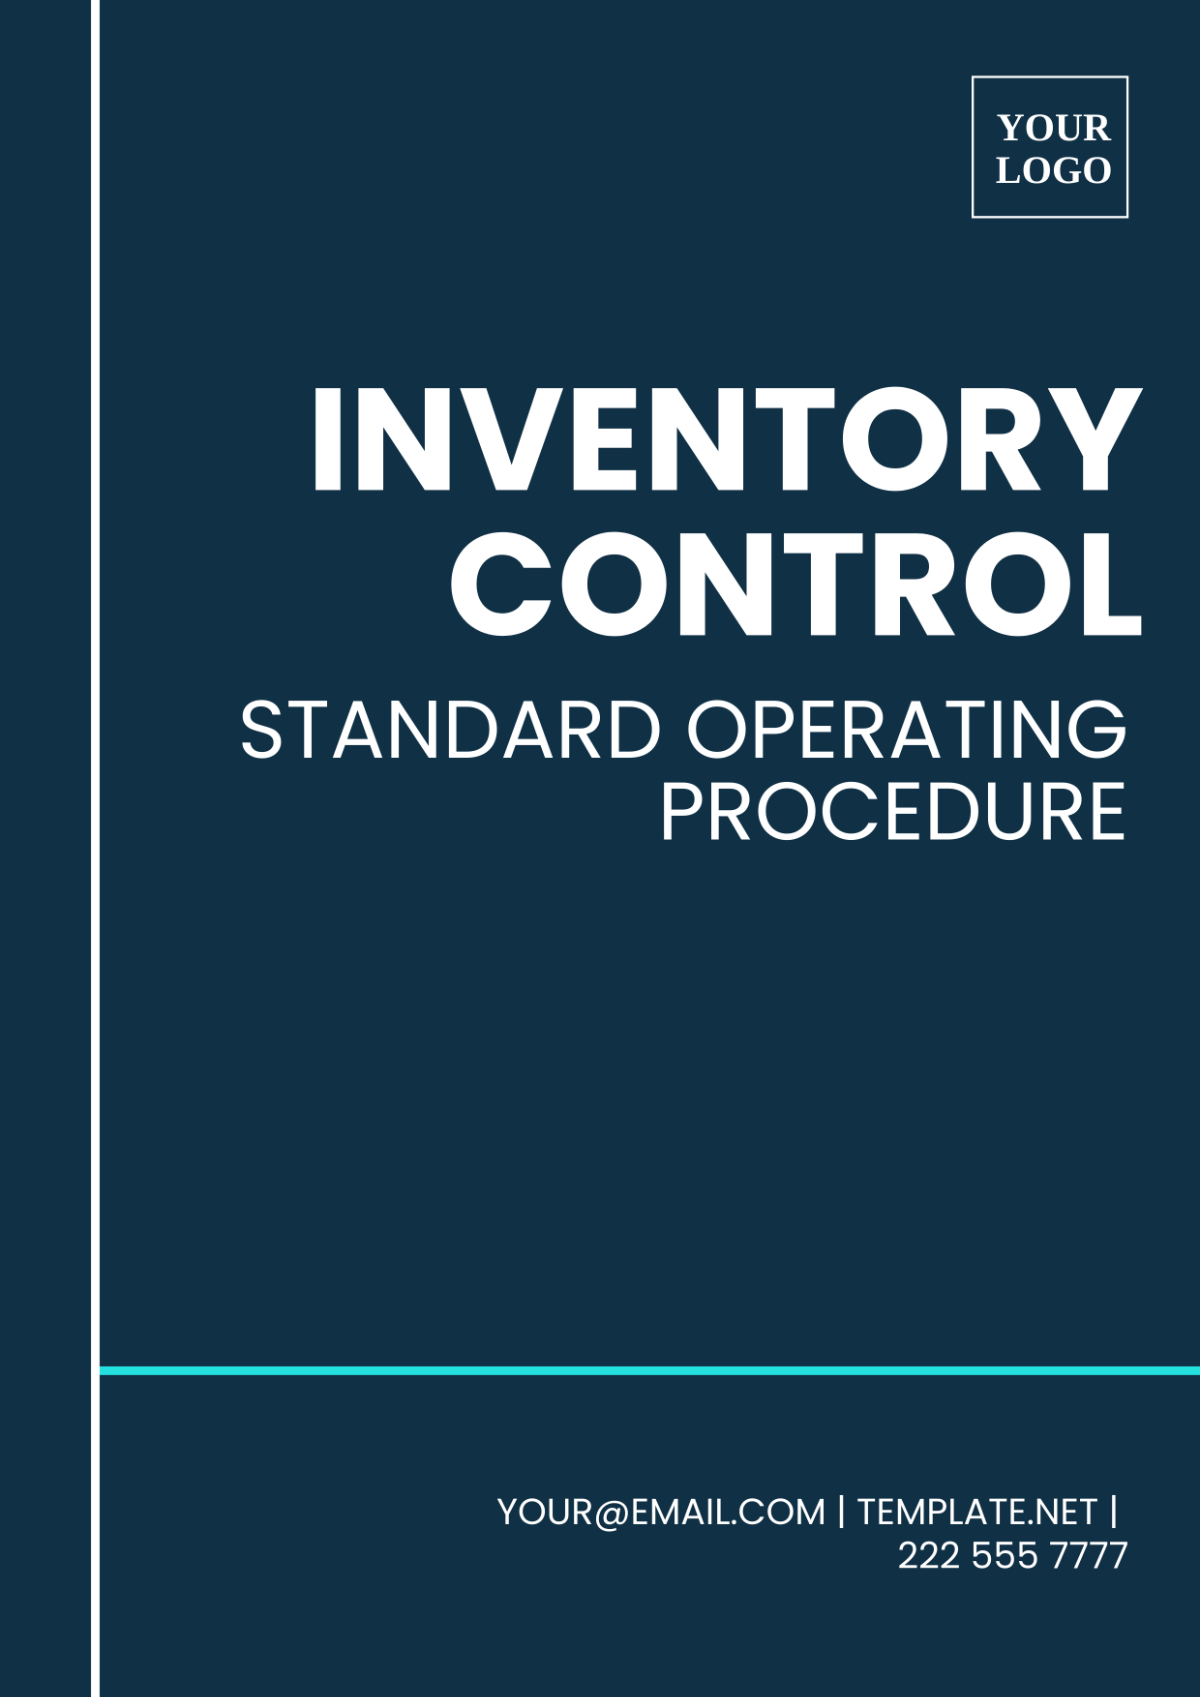 Inventory Control SOP Template